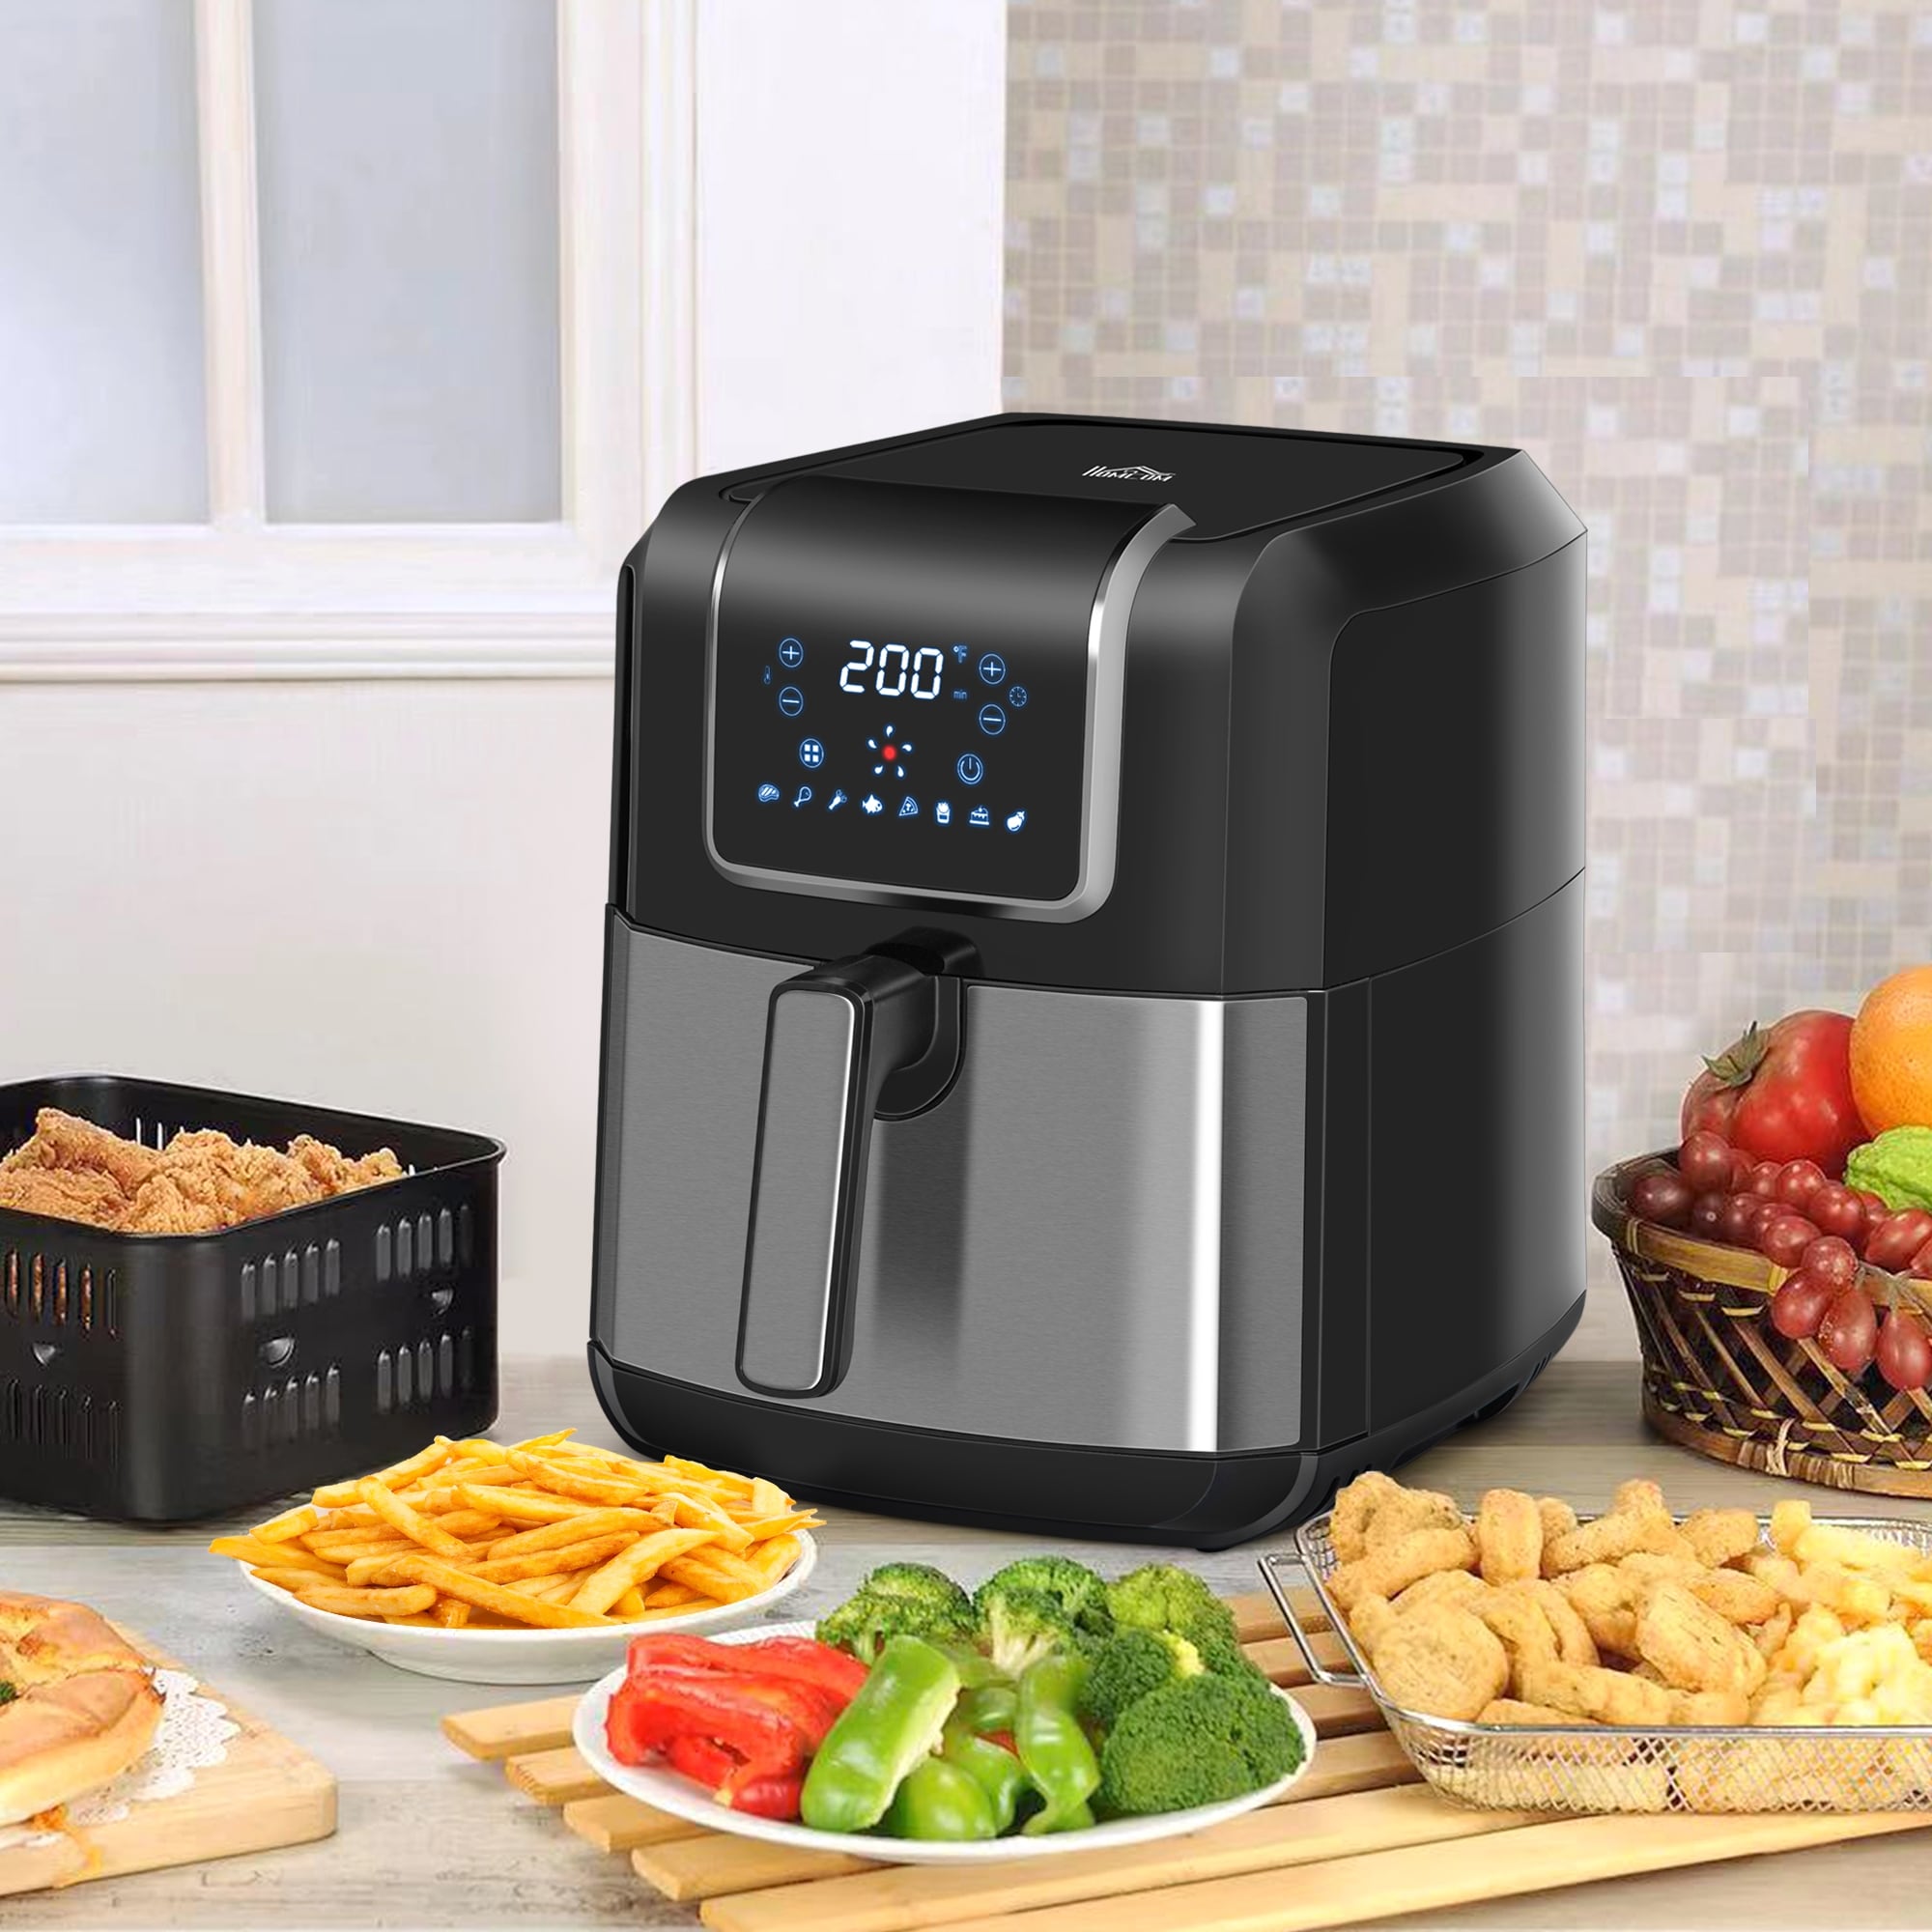 https://ak1.ostkcdn.com/images/products/is/images/direct/7e9d4f1b56dc6da85fd7b65a241e2d208fdde2cc/HOMCOM-Air-Fryer%2C-1700W-6.9-Quart-Air-Fryers-Oven-with-Digital-Display%2C-360%C2%B0-Air-Circulation%2C-Adjustable-Temperature%2C-Timer.jpg